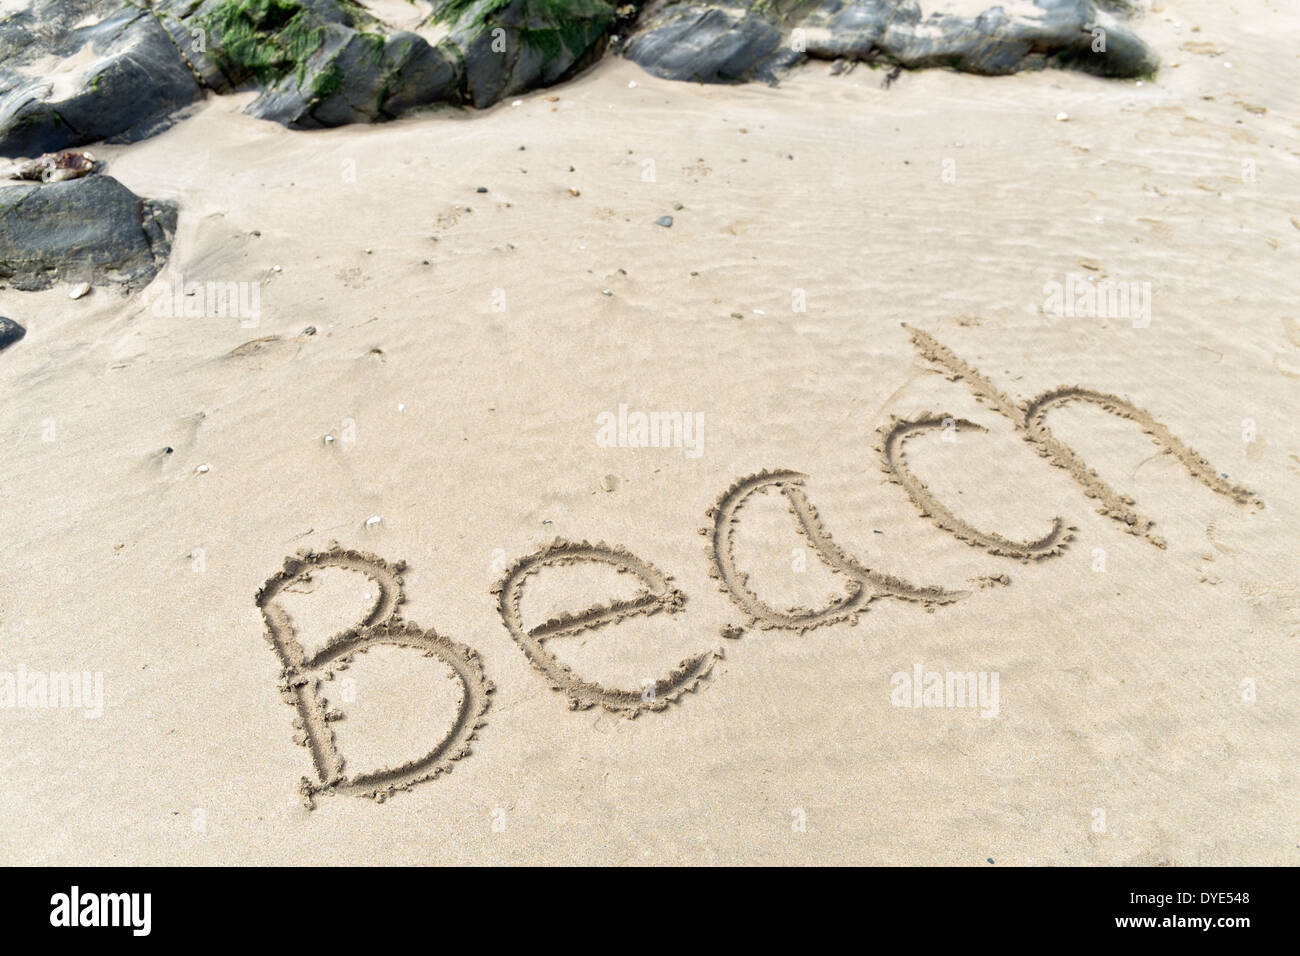 Large letters spelling the word beach written in the sand by rocks using on a sunny, sandy shore Stock Photo